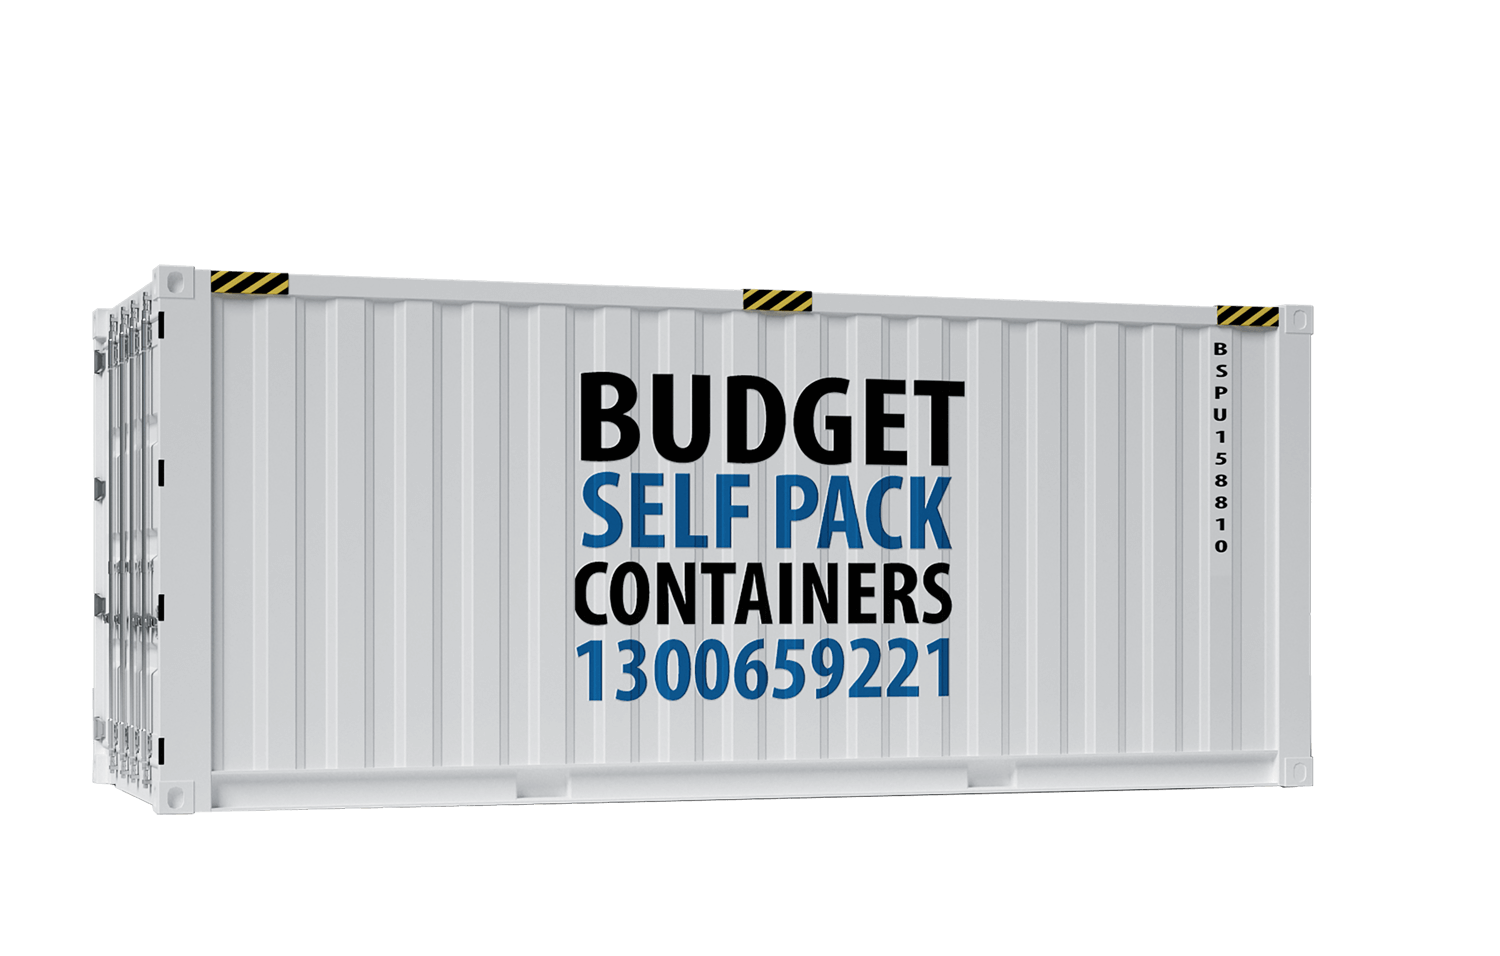 Moving Containers Brisbane | Budget Self Pack Containers